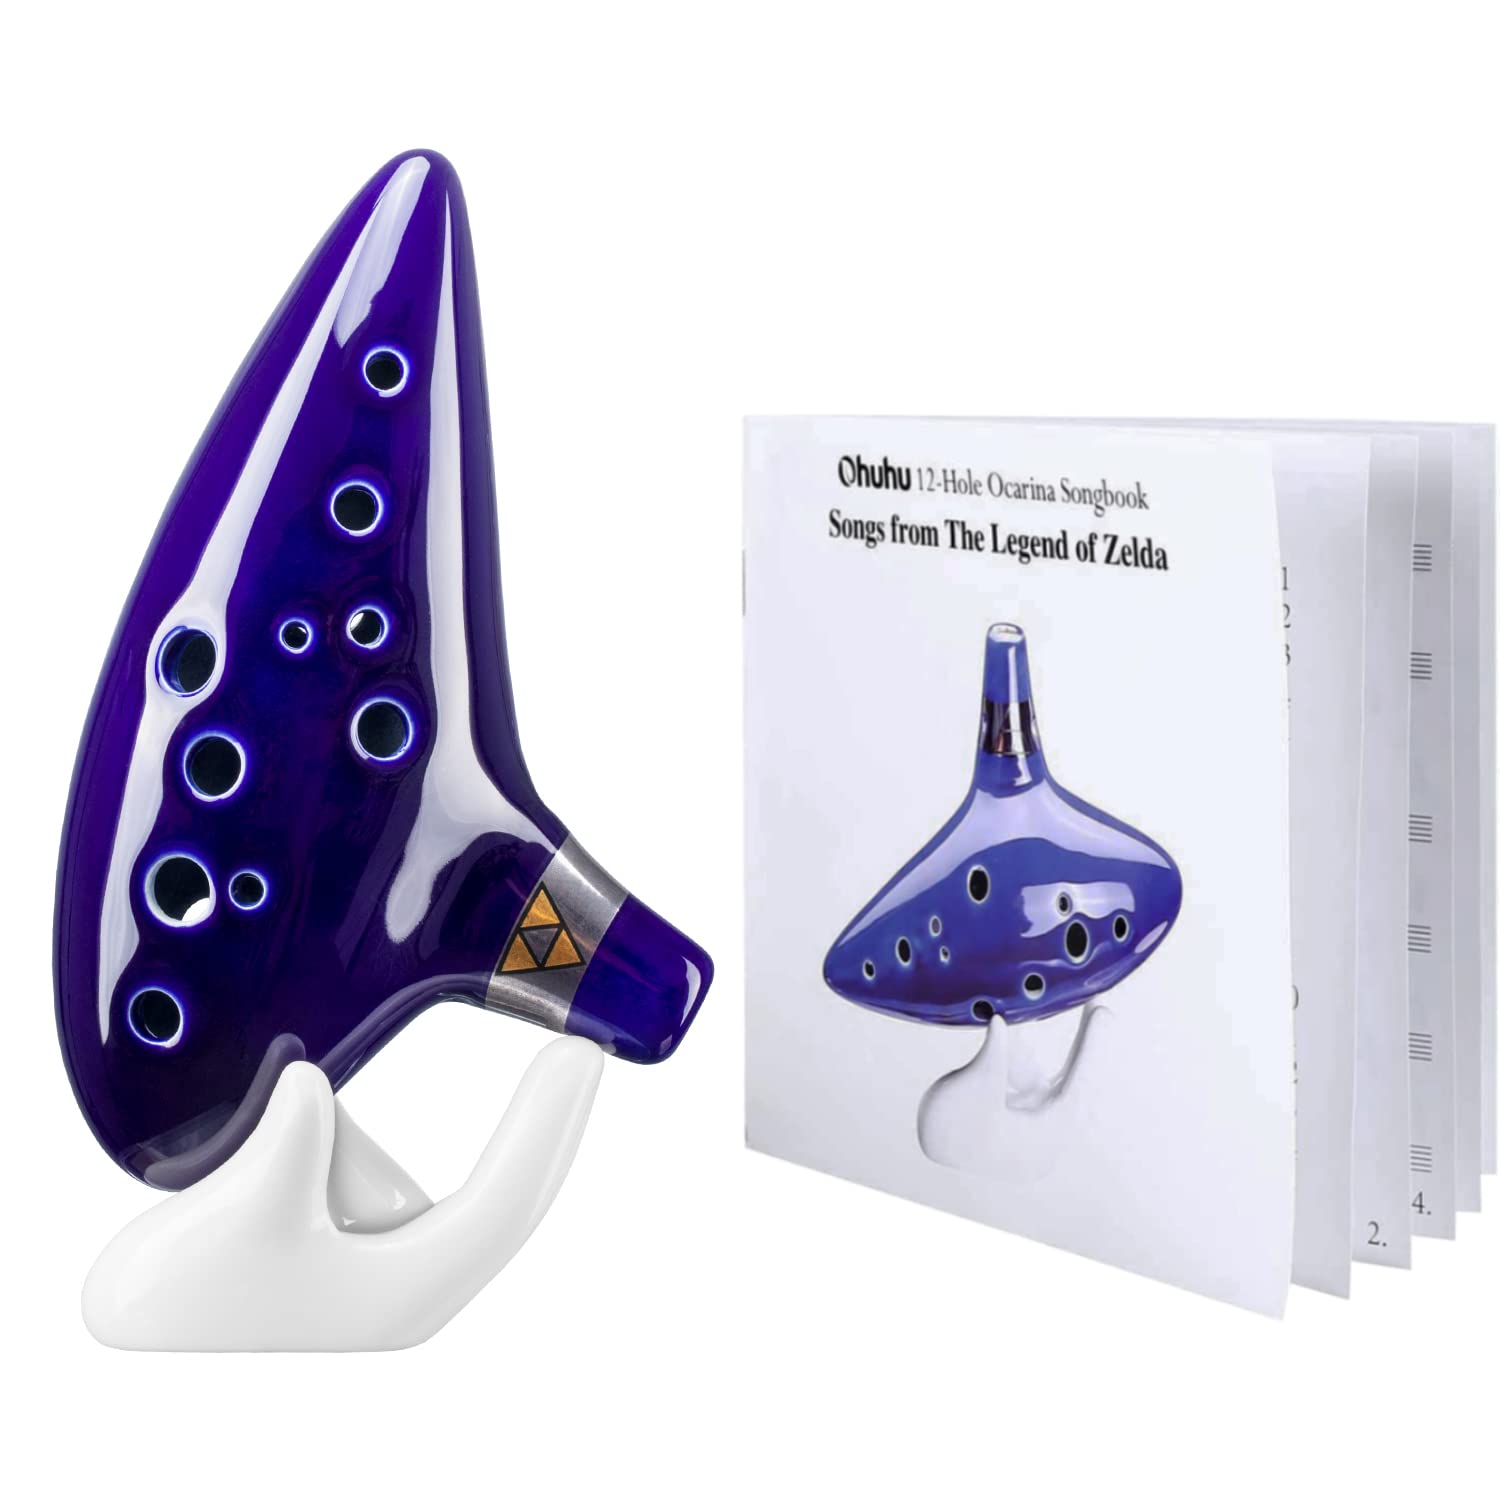 Ohuhu Zelda Ocarina with Song Book (Songs From the Legend of Zelda) Display Stand, FDA Tested 12 Hole Alto c Zelda Ocarinas Play